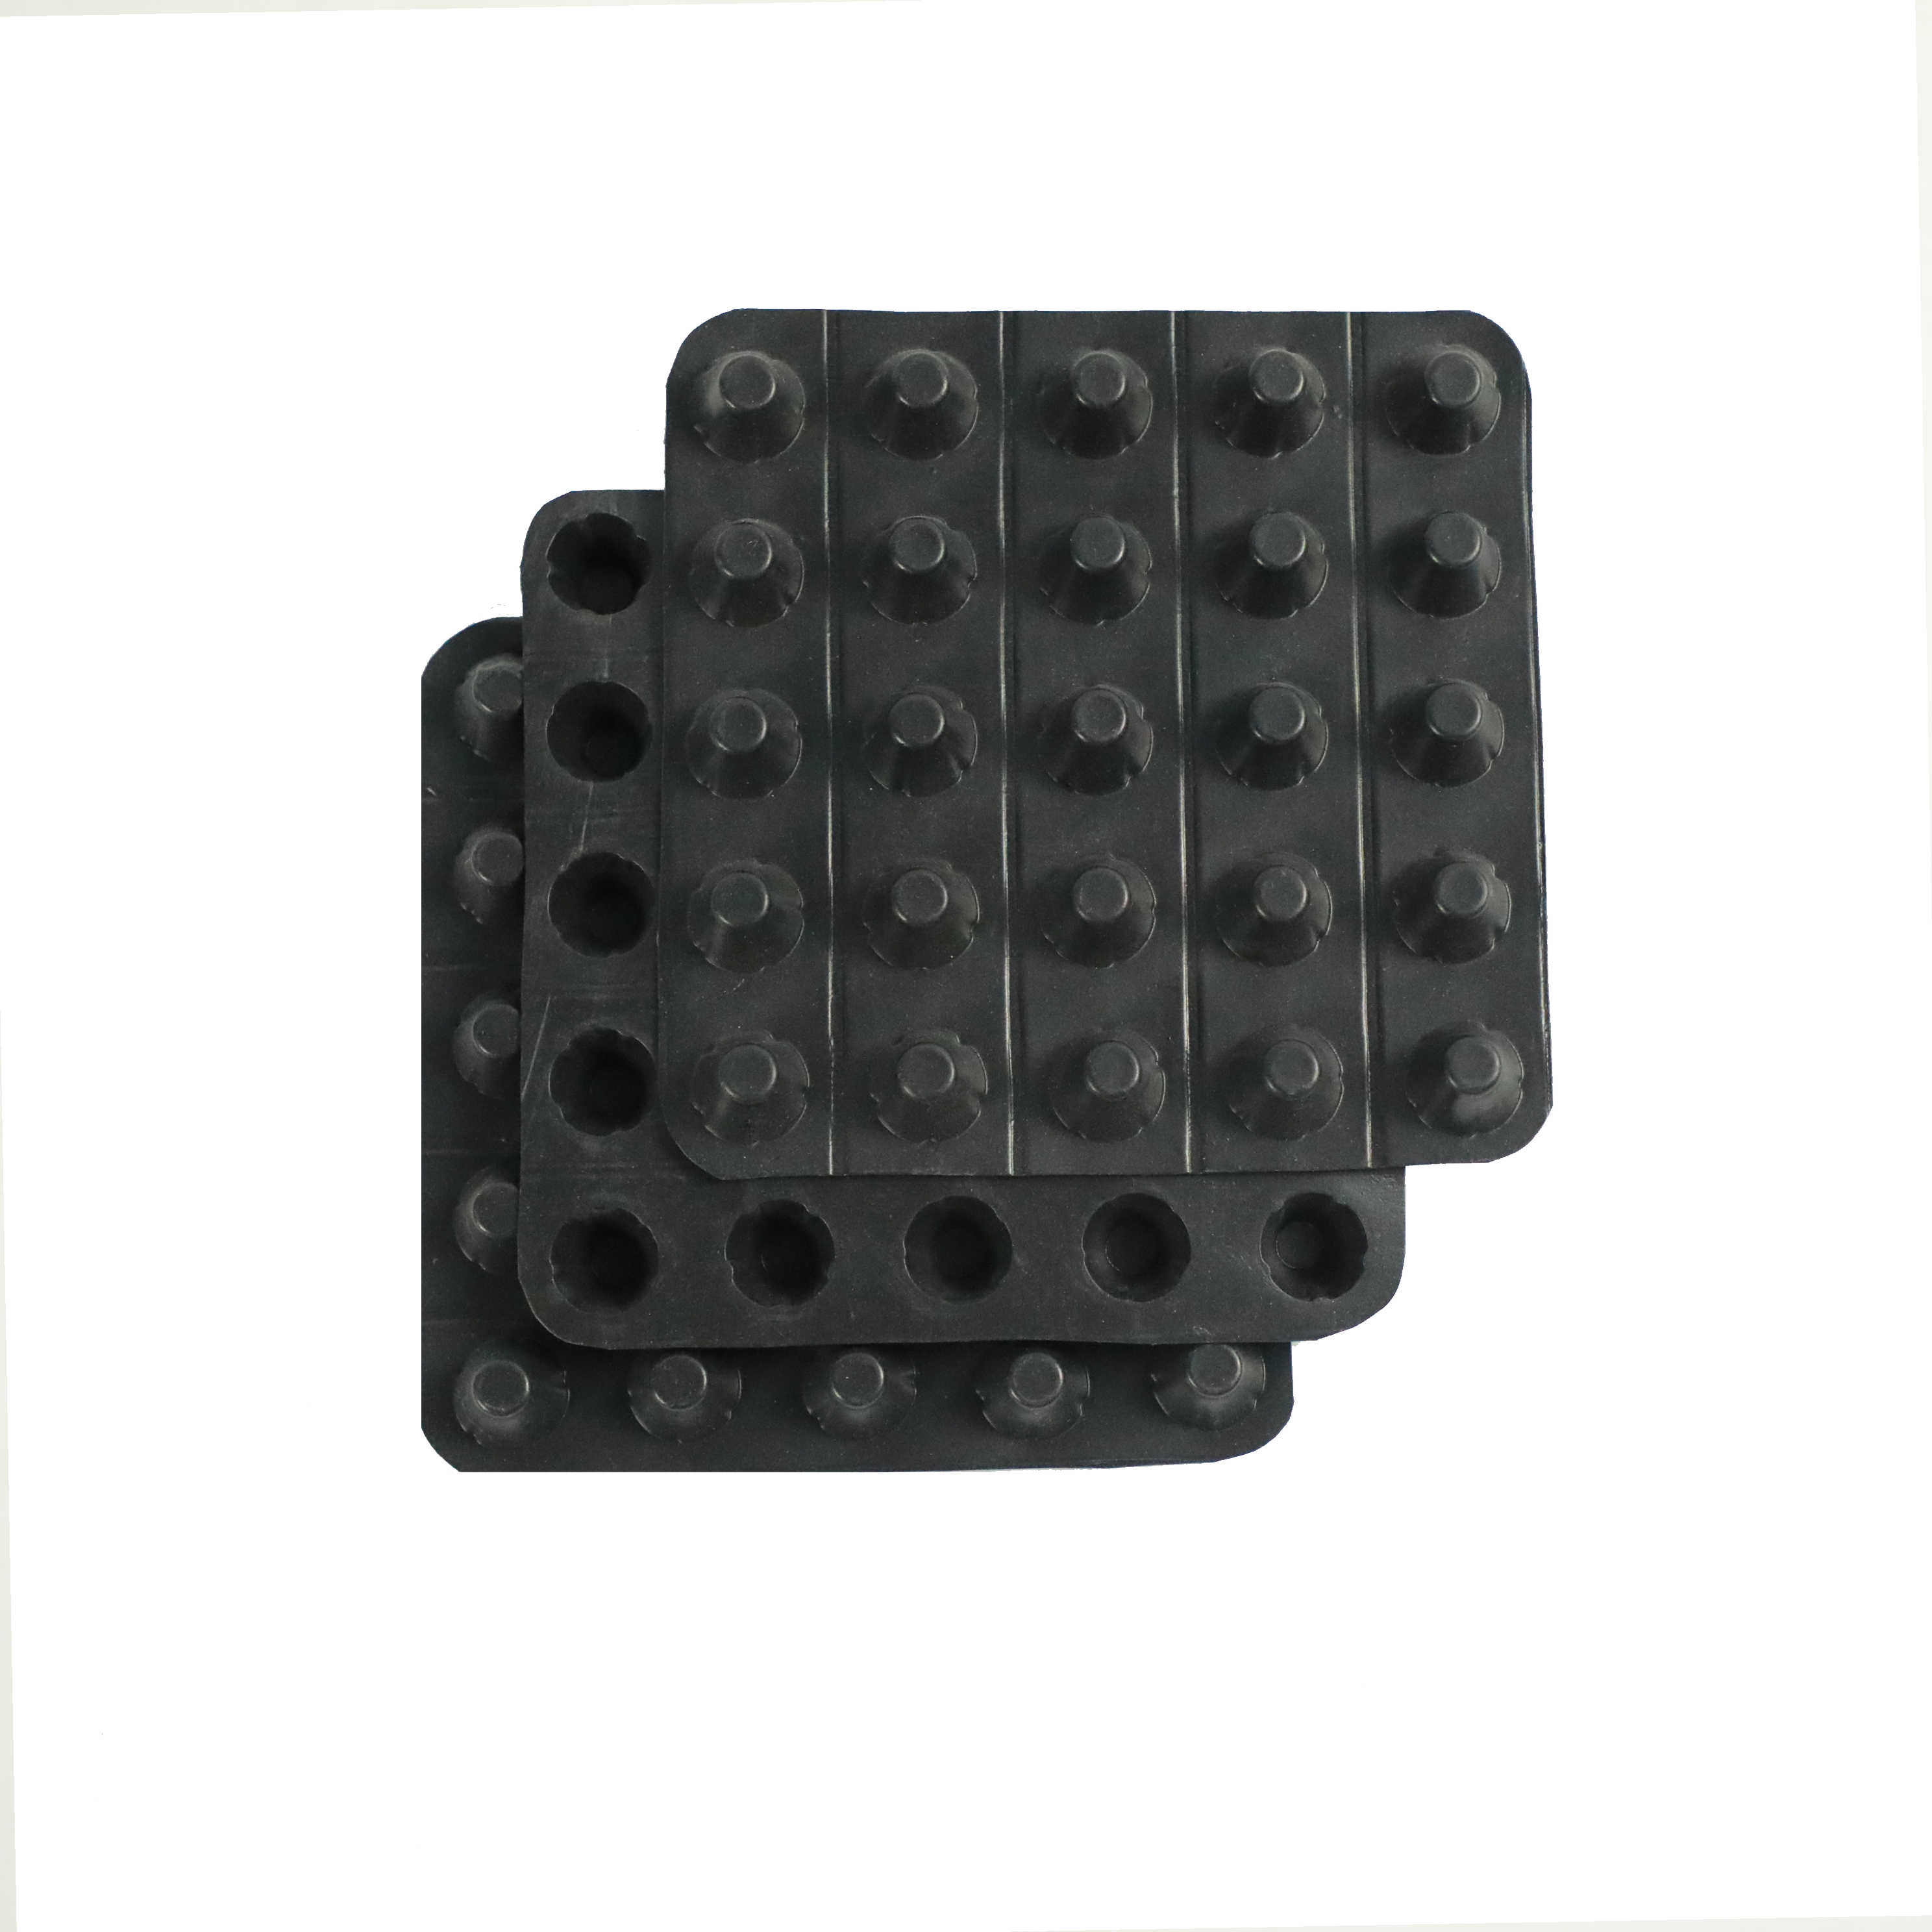 HDPE plastic drainage board for basement waterproofing